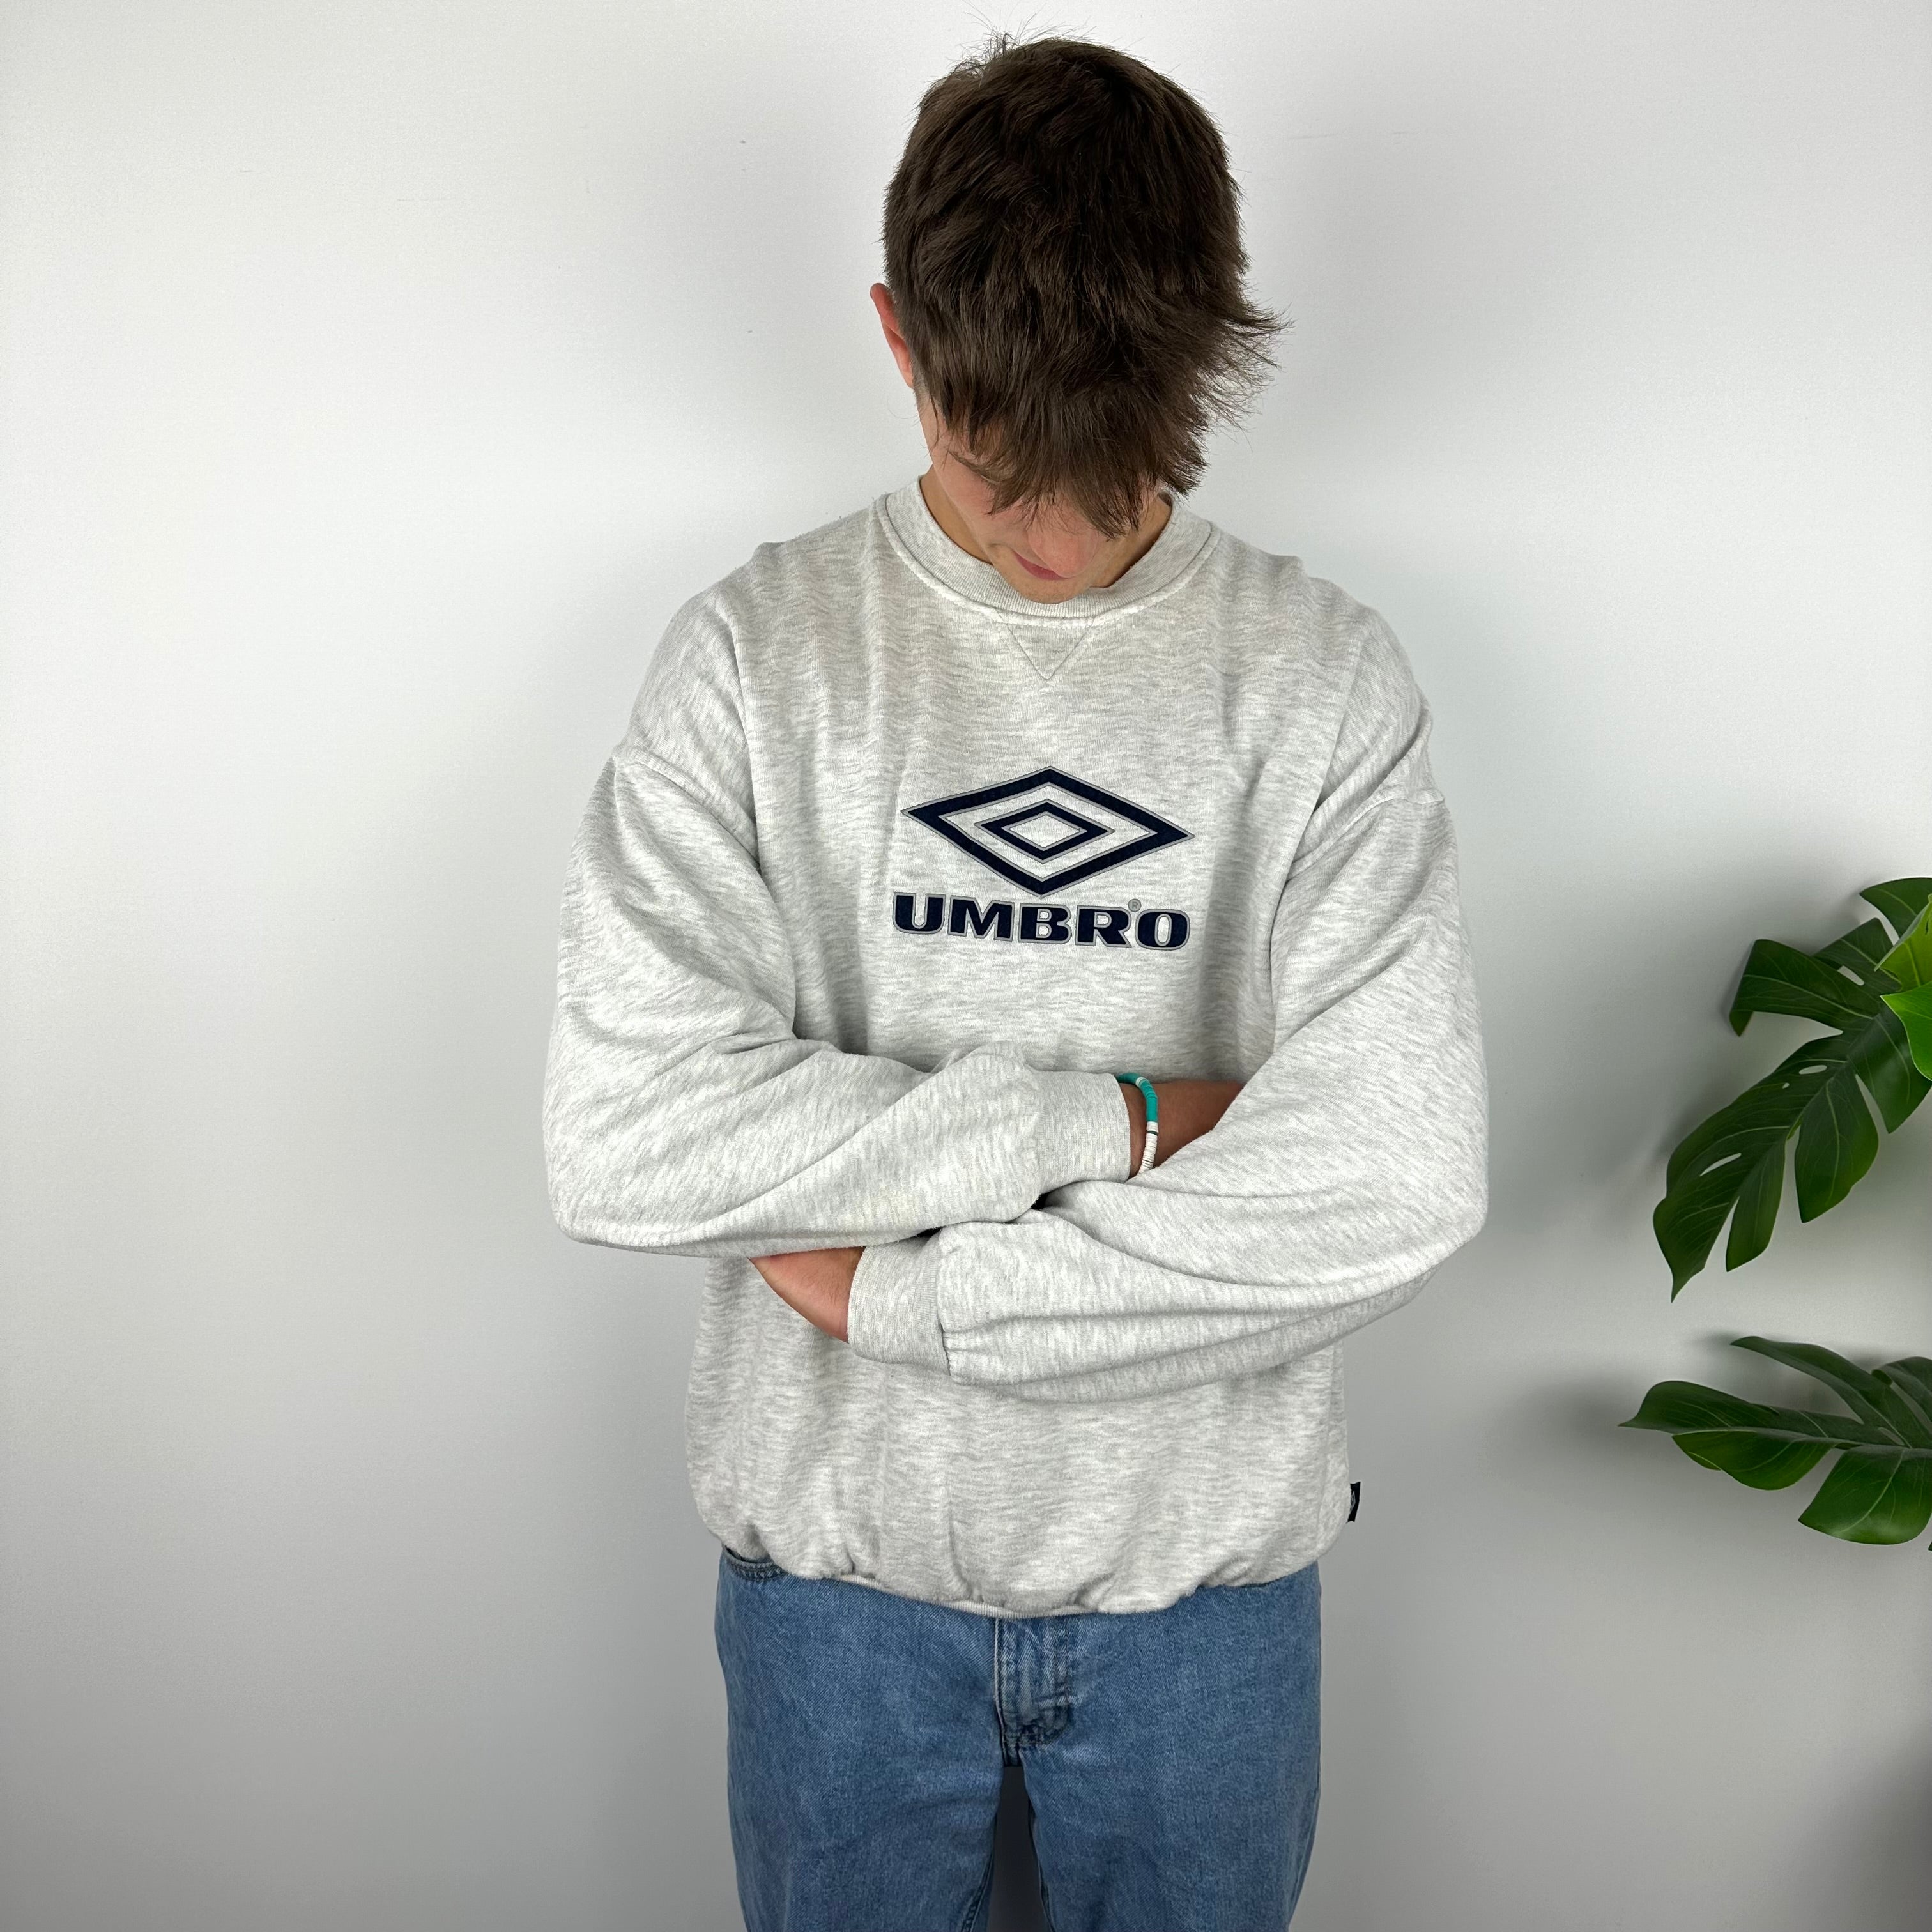 Umbro Grey Embroidered Spell Out Sweatshirt (XL)